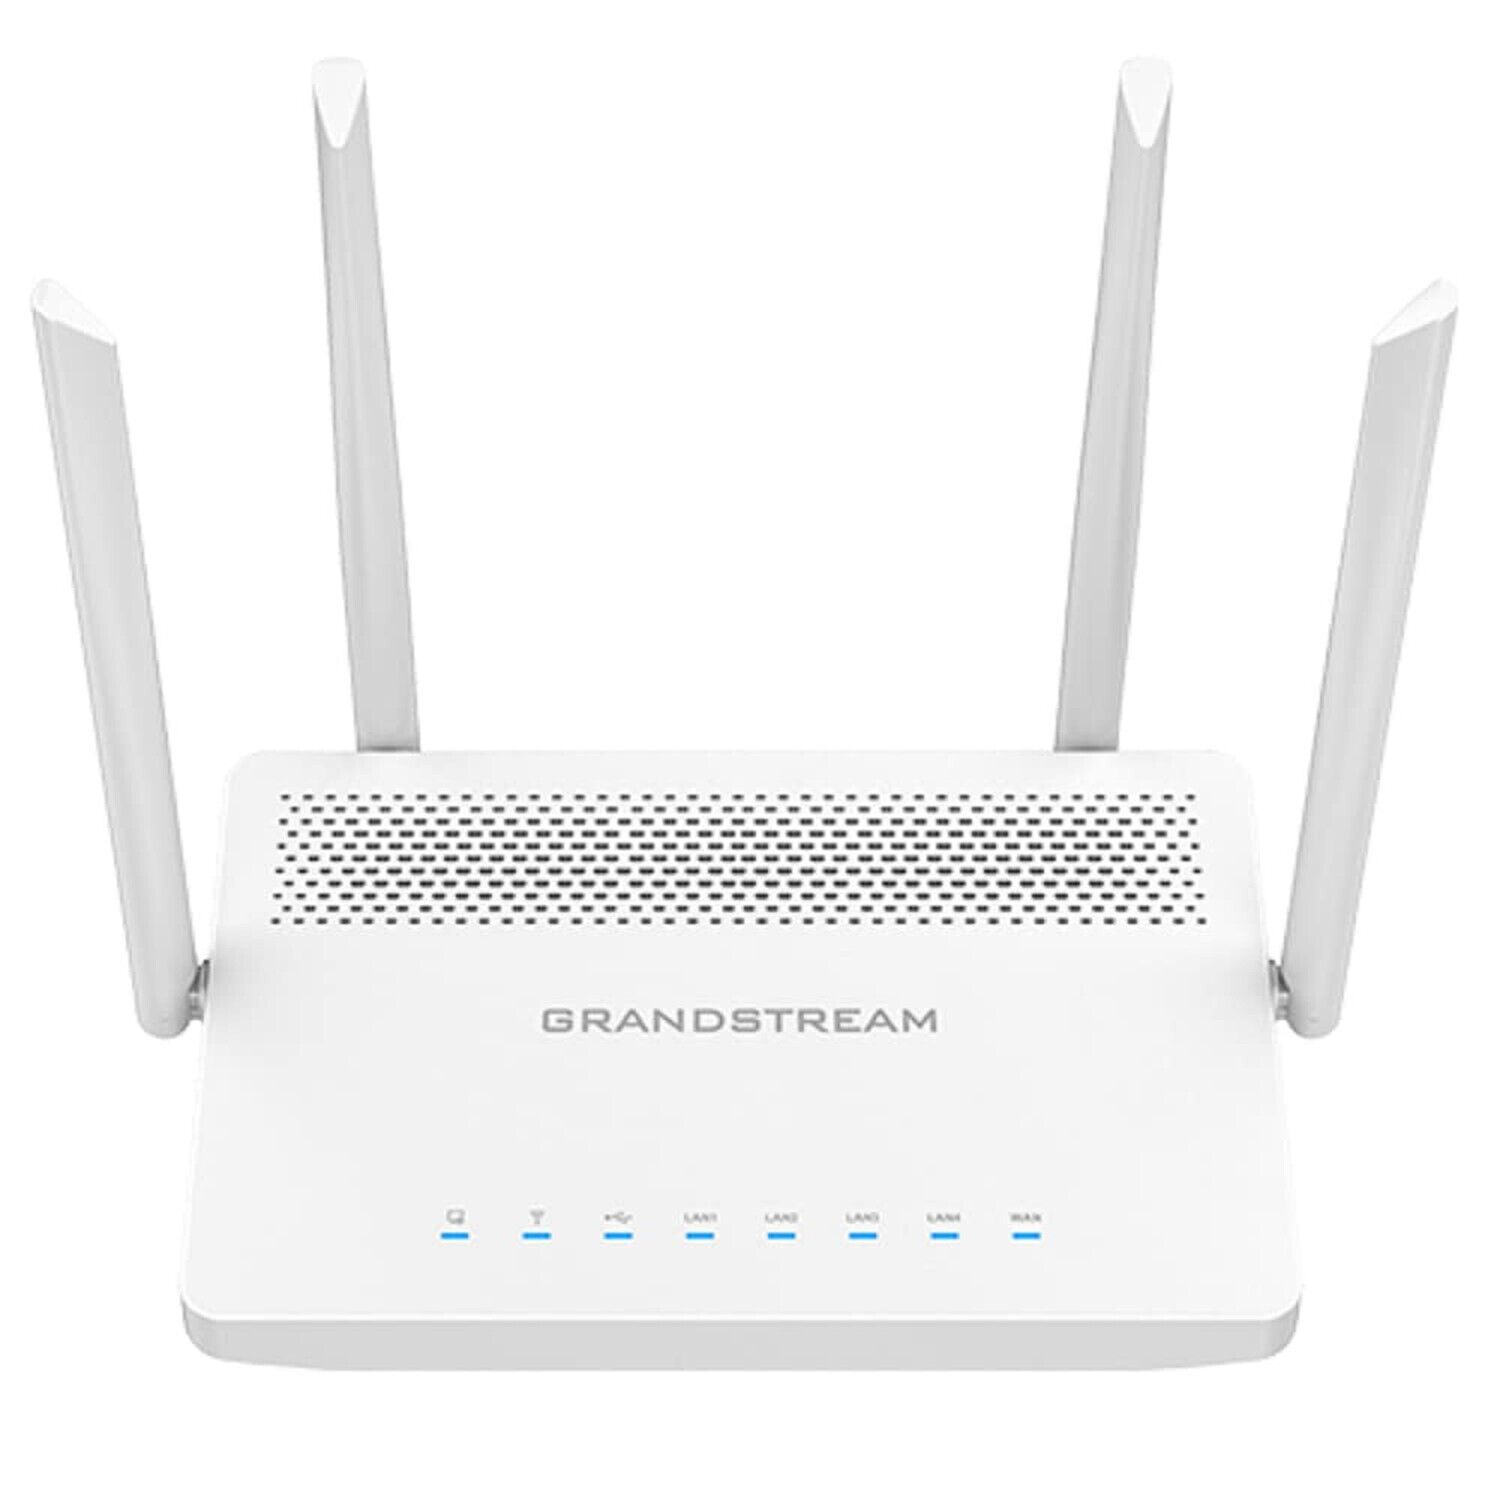 GRANDSTREAM DUAL BAND WIFI ROUTER